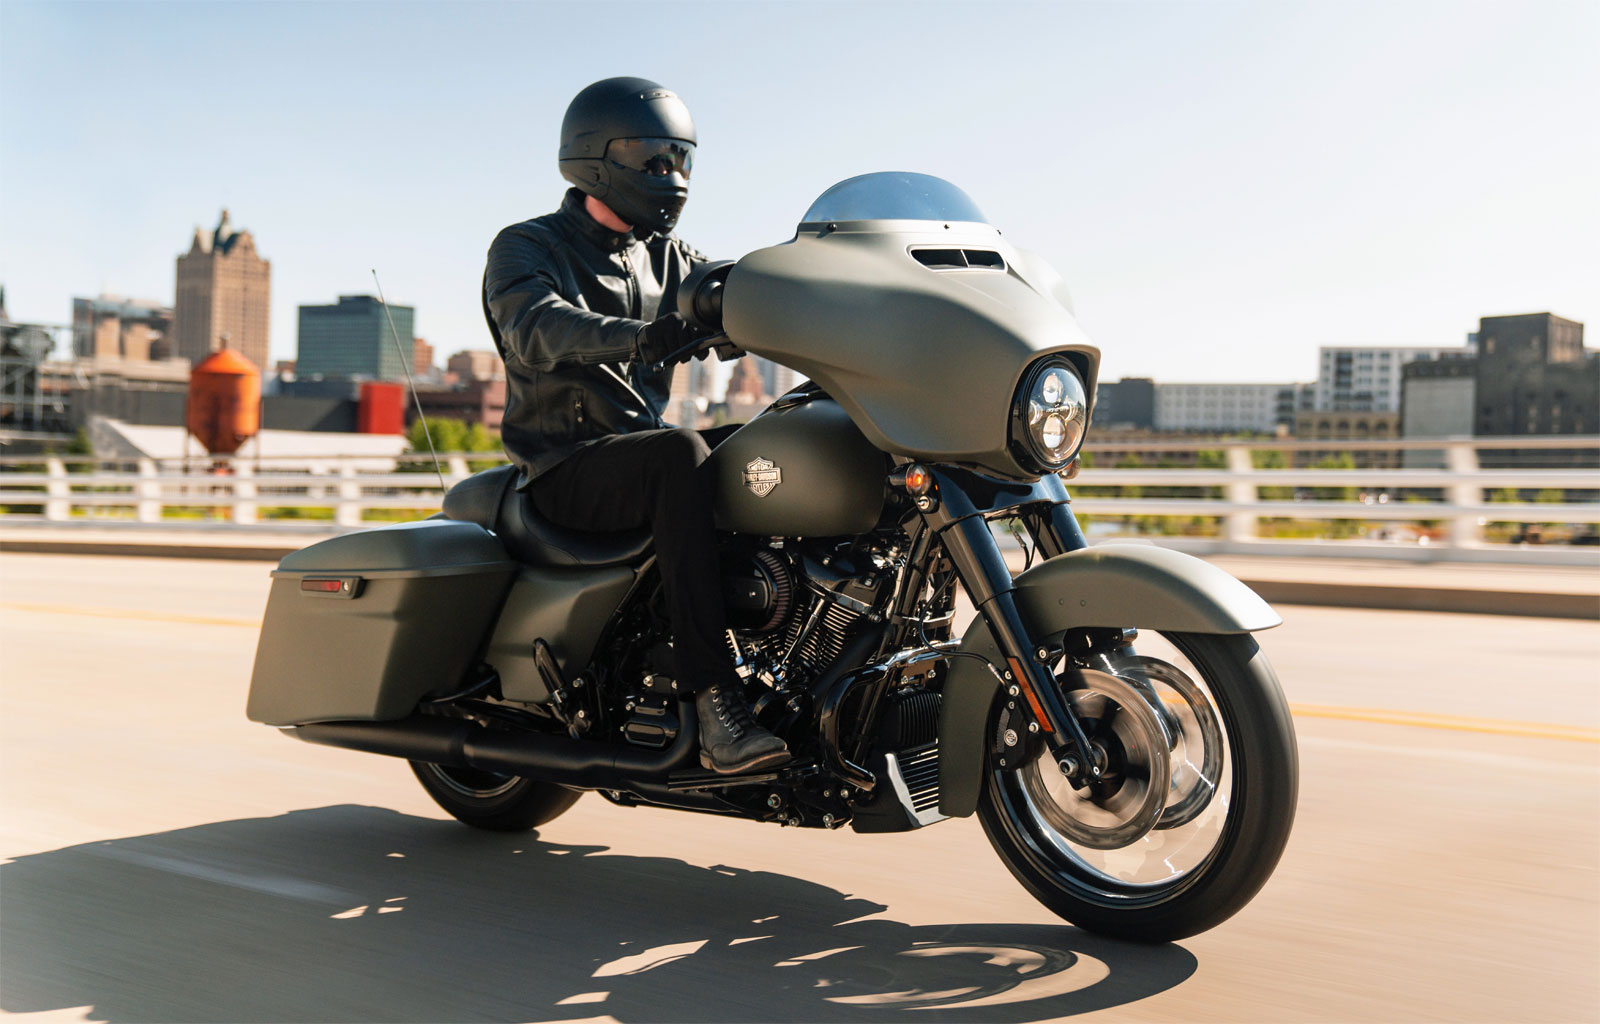 How The 2021 Harley Davidson Street Glide Special Performs On The Road